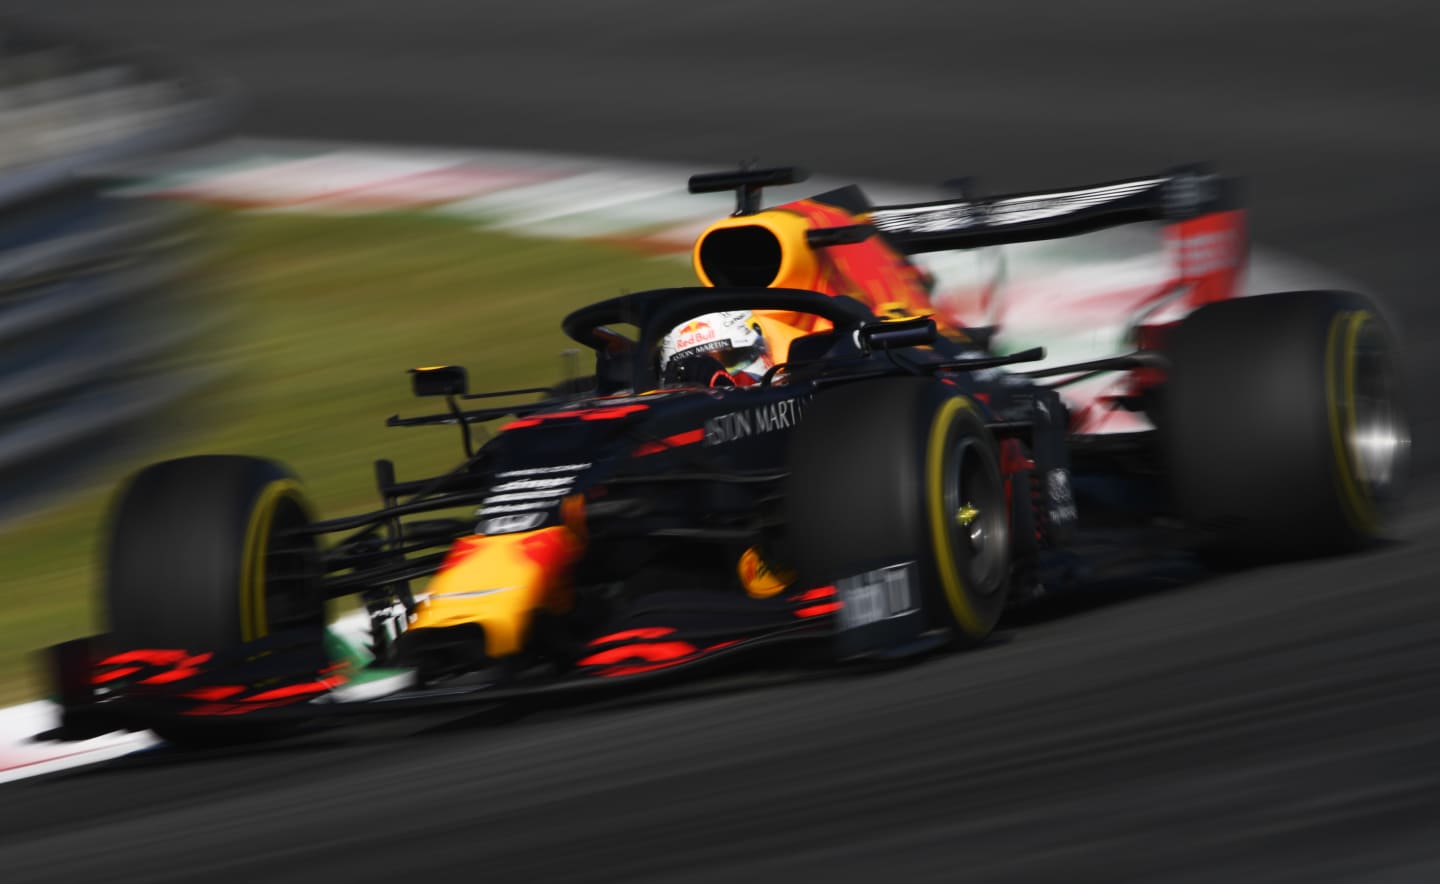 MONZA, ITALY - SEPTEMBER 04: Max Verstappen of the Netherlands driving the (33) Aston Martin Red Bull Racing RB16 on track during practice for the F1 Grand Prix of Italy at Autodromo di Monza on September 04, 2020 in Monza, Italy. (Photo by Rudy Carezzevoli/Getty Images)